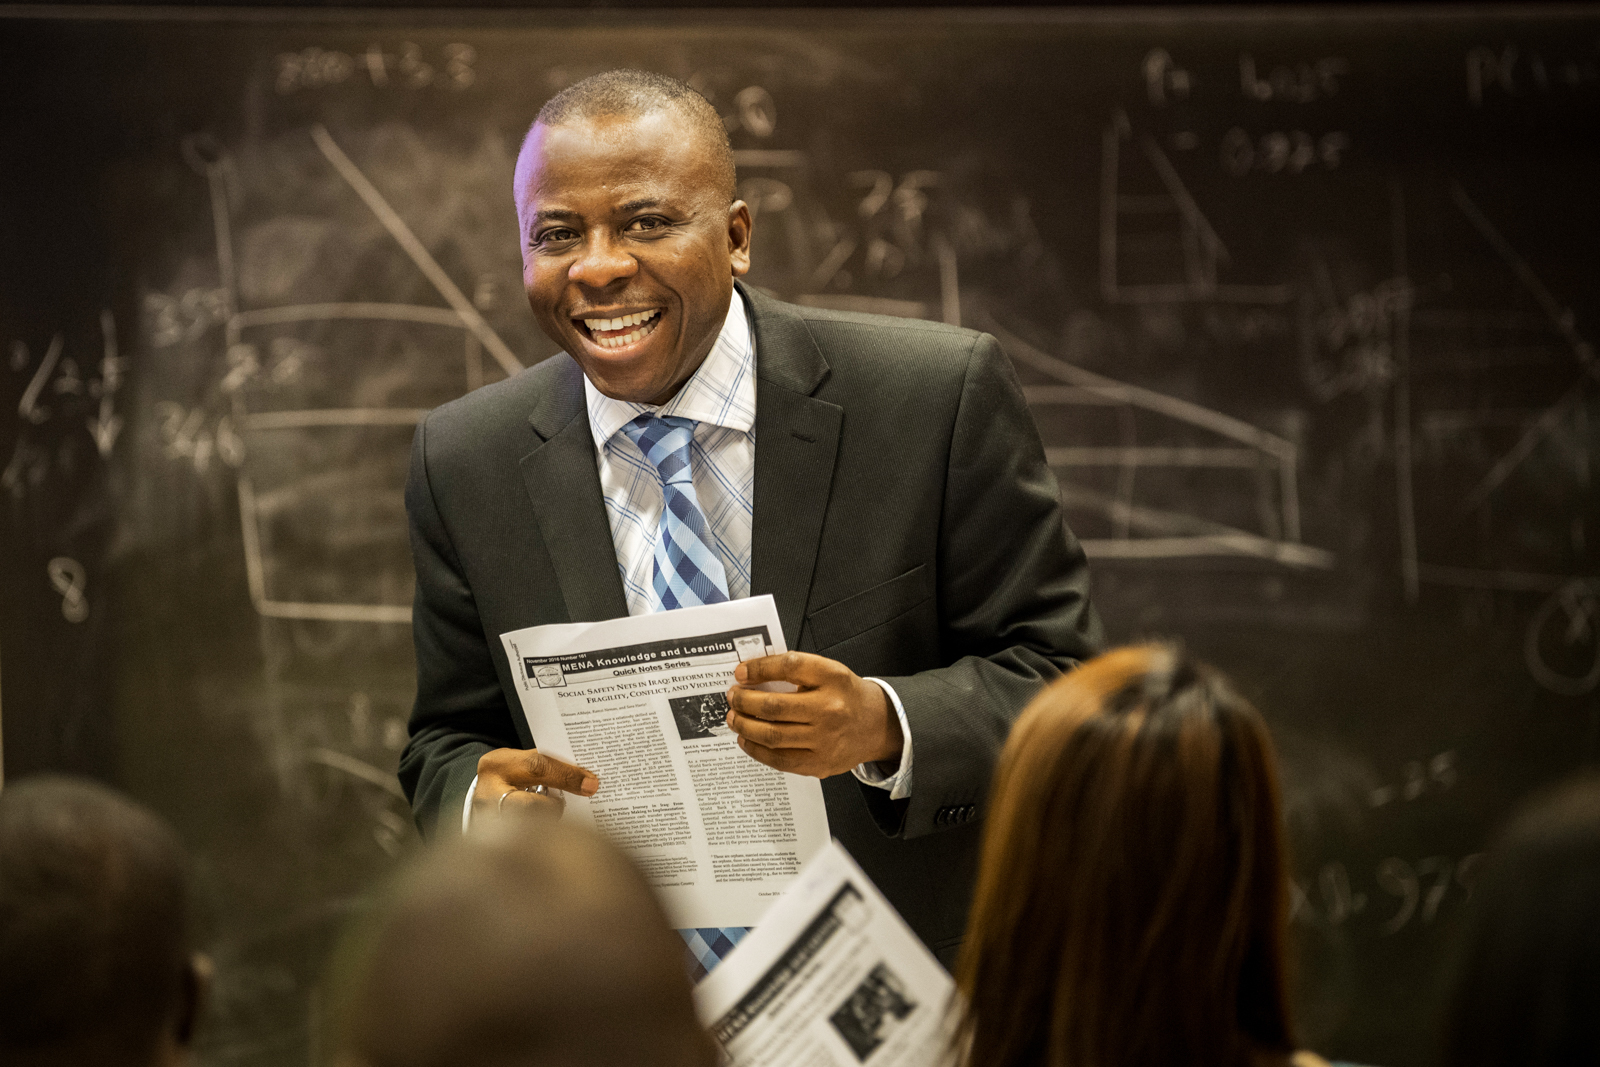 Instructor smiling in class in front of blackboard